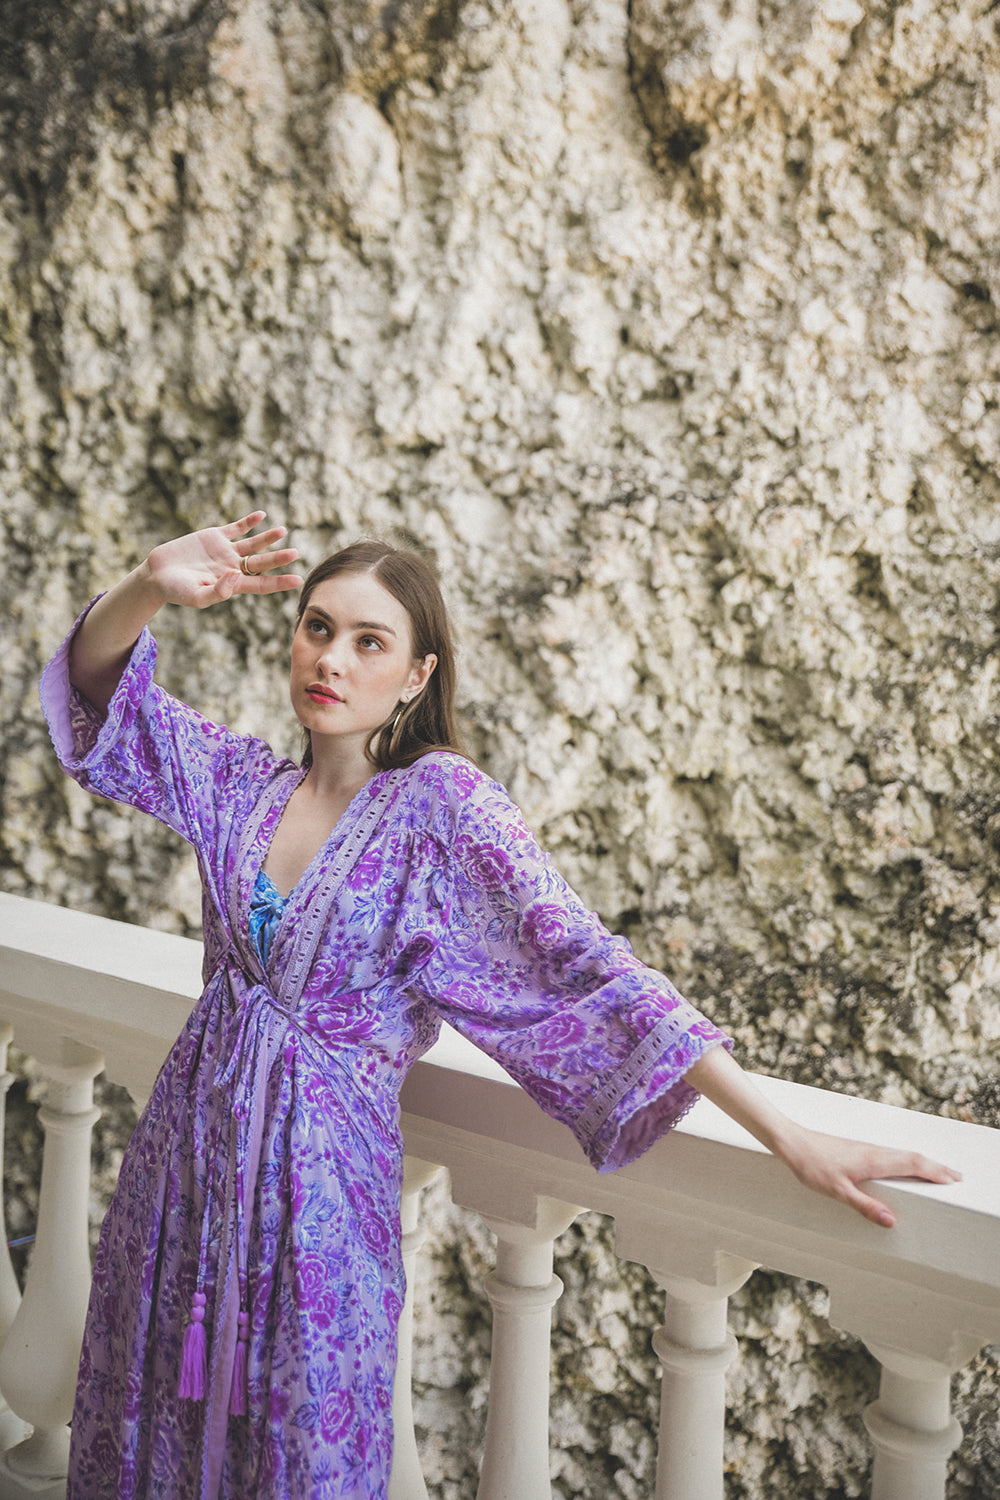 Wrap yourself in bohemian luxury with the Peony Long Robe, a kimono masterpiece from Tulle and Batiste's Peony collection, handmade by Balinese artisans with ethical principles